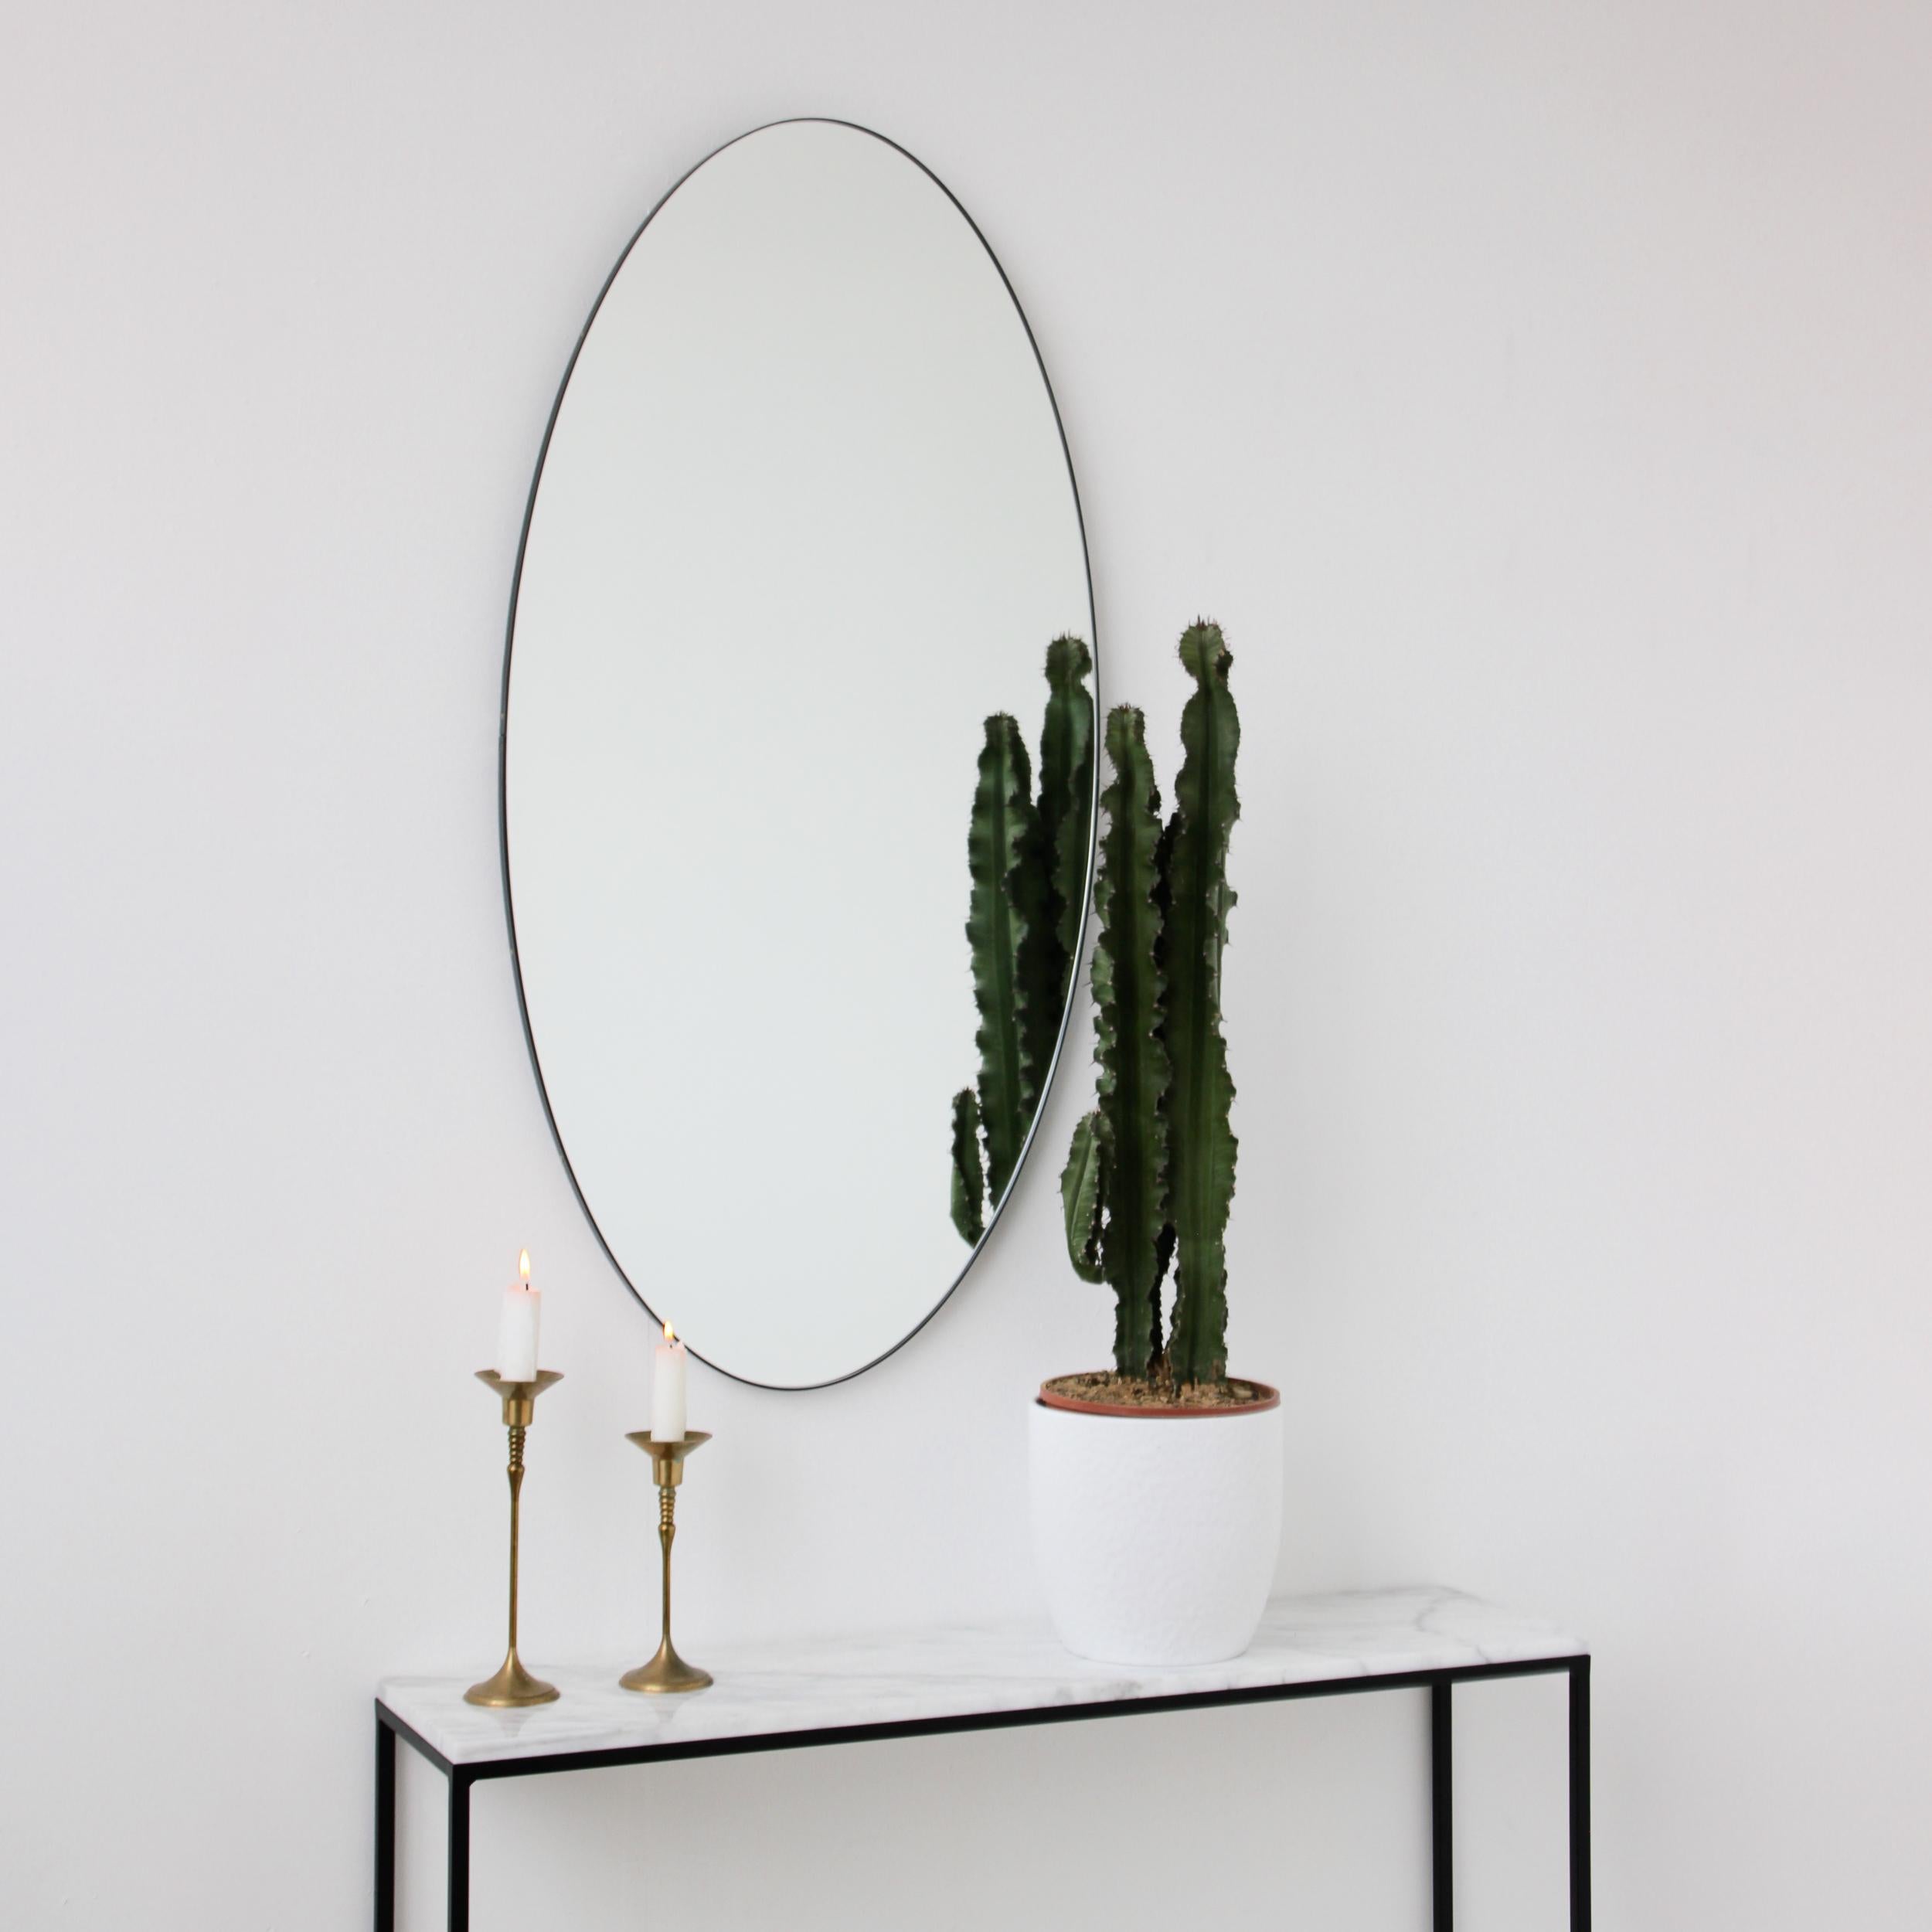 Minimalist large oval mirror with a contemporary aluminium powder coated black frame. Designed and handcrafted in London, UK.

Our mirrors are designed with an integrated French cleat (split batten) system that ensures the mirror is securely mounted